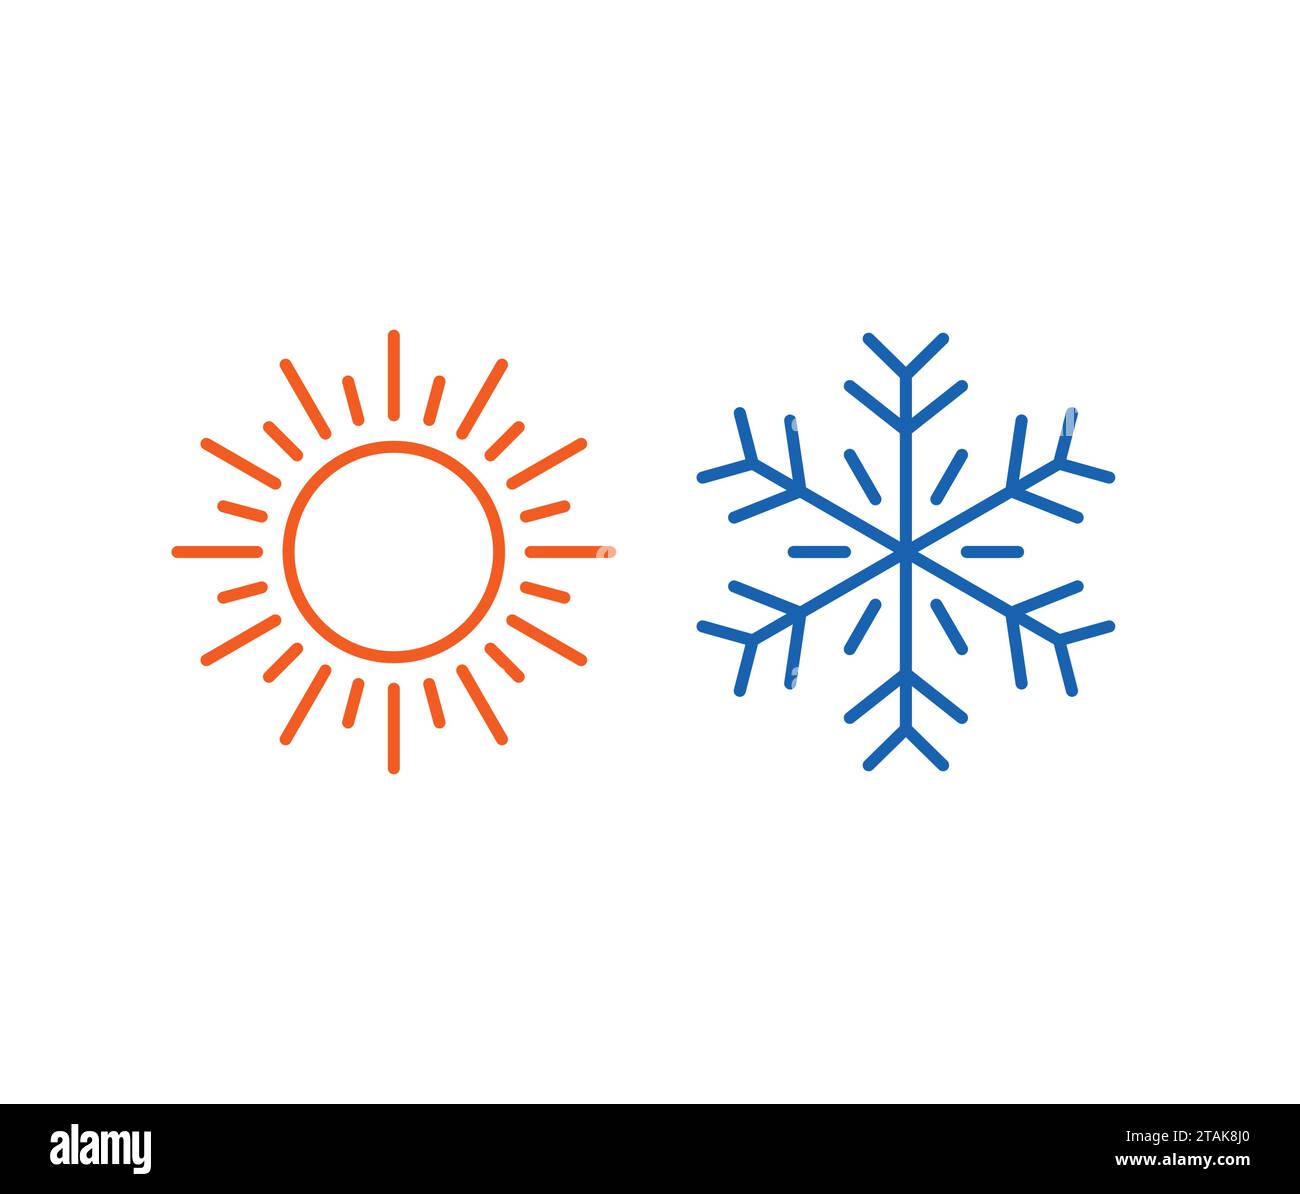 Hot and cold icons isolated on white background. Sun and snowflake symbol vector illustration Stock Vector